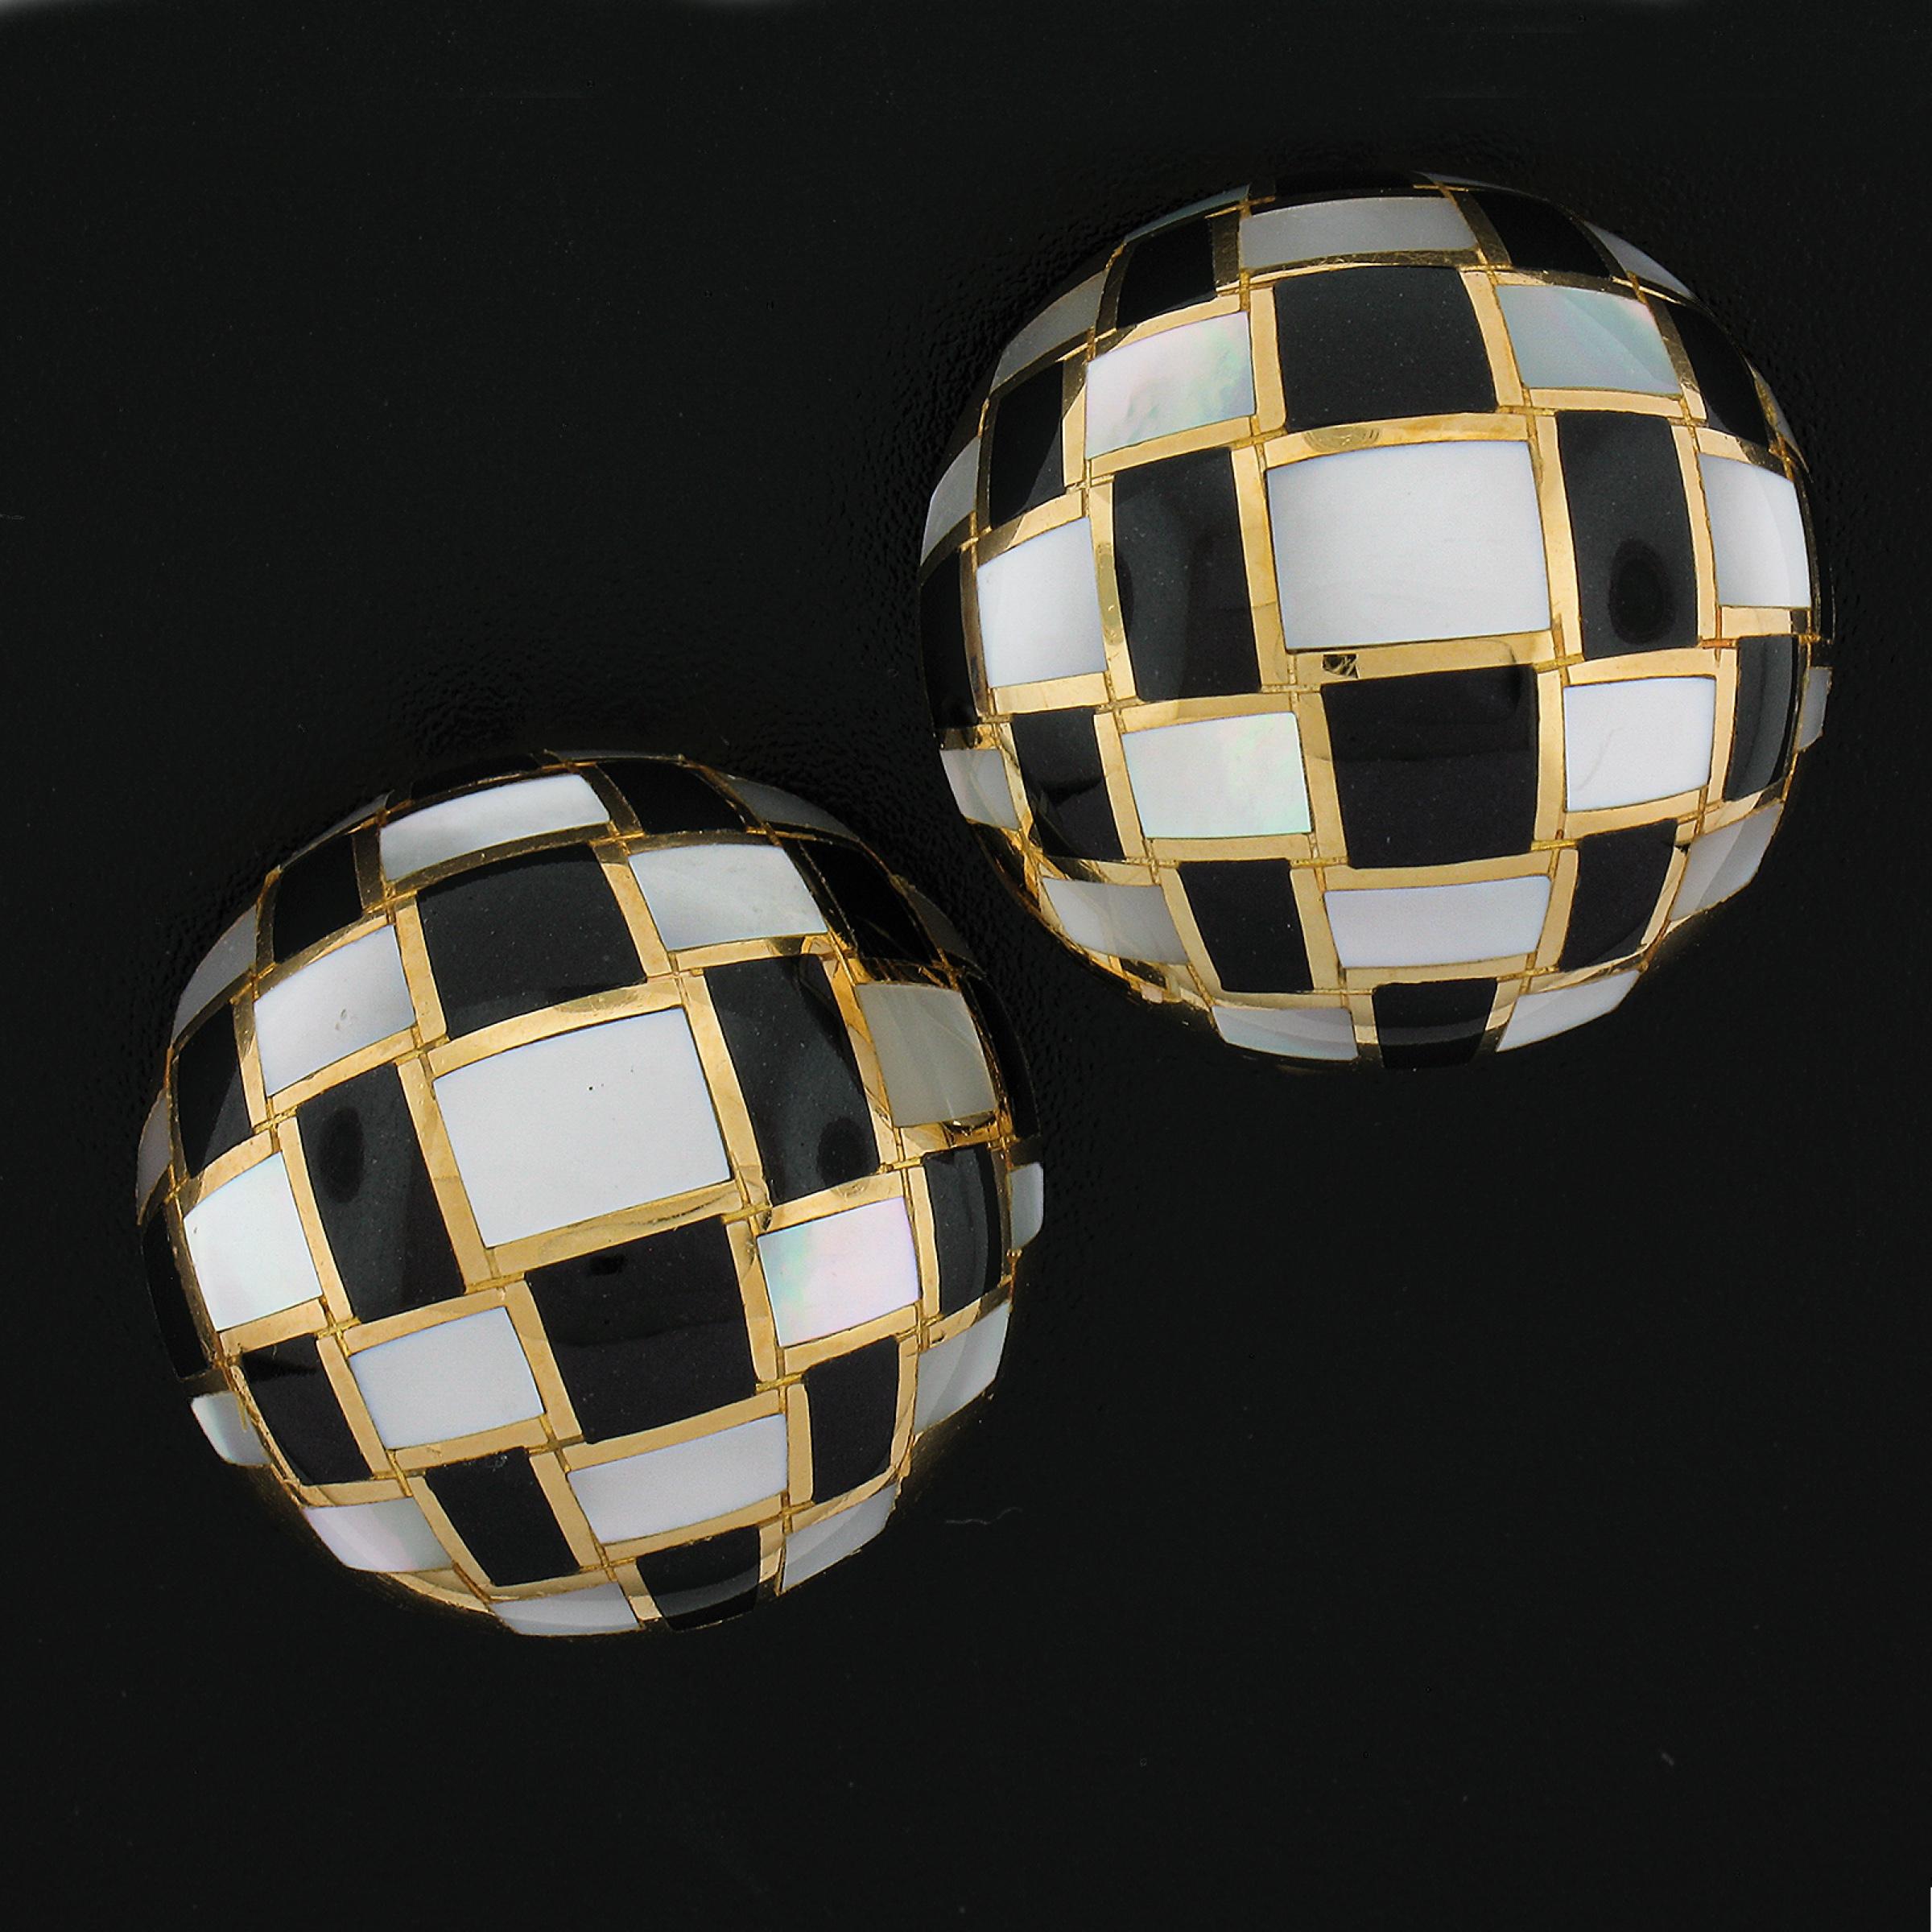 --Stone(s):--
Numerous Natural Genuine Black Onyx & Mother of Pearl - Custom Cut - Inlaid Set - Black & White Color

Material: Solid 18k Yellow Gold
Weight: 25.20 Grams
Backing:	Clip On Closures (Pierced ears are NOT required)
Diameter: 25.2mm (1